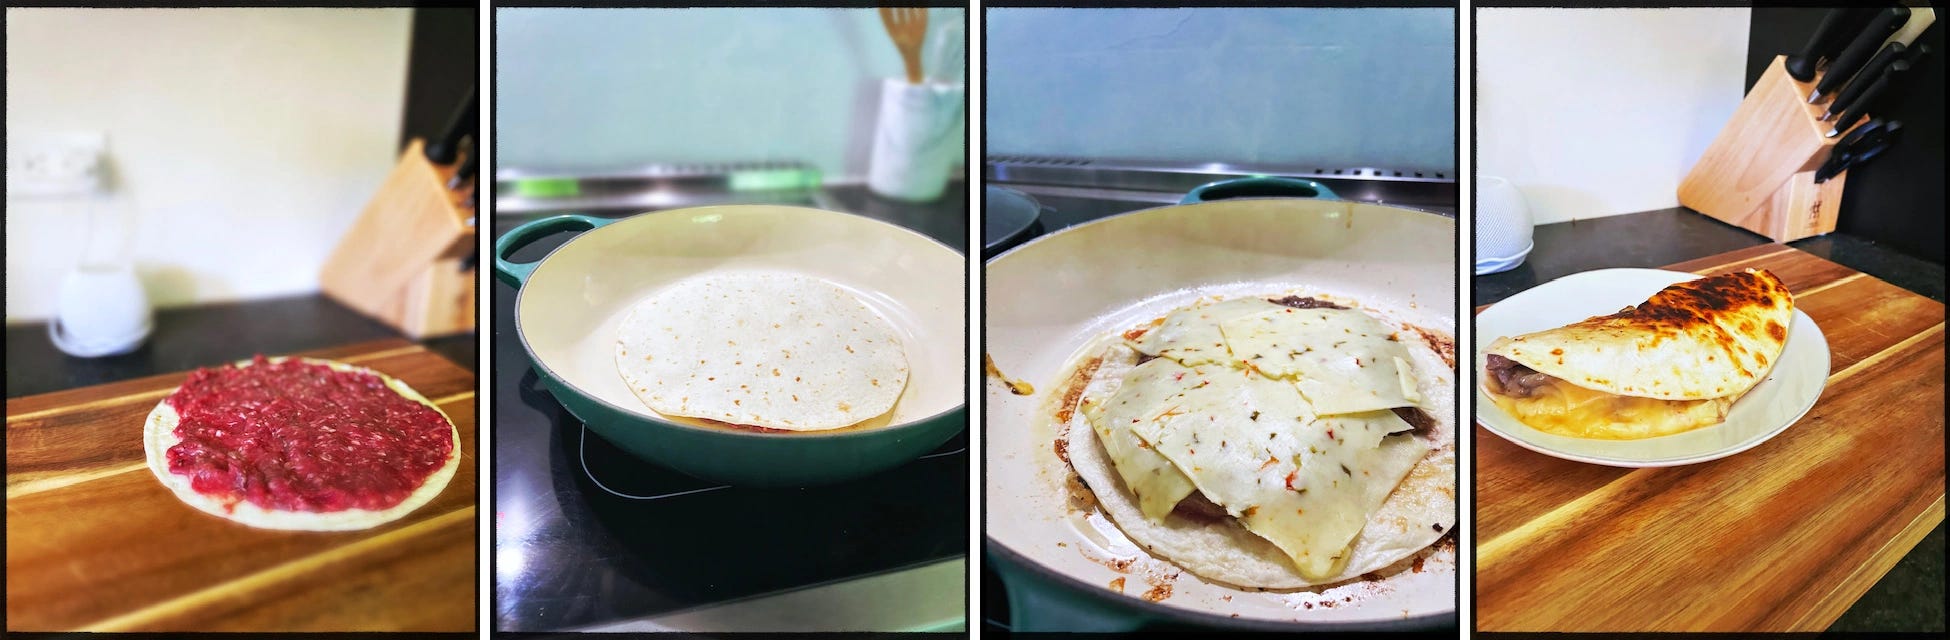 Four images: Meat flat on a tortilla, tortilla flipped in pan, ghost pepper cheese on tortilla in pan, folded final taco.